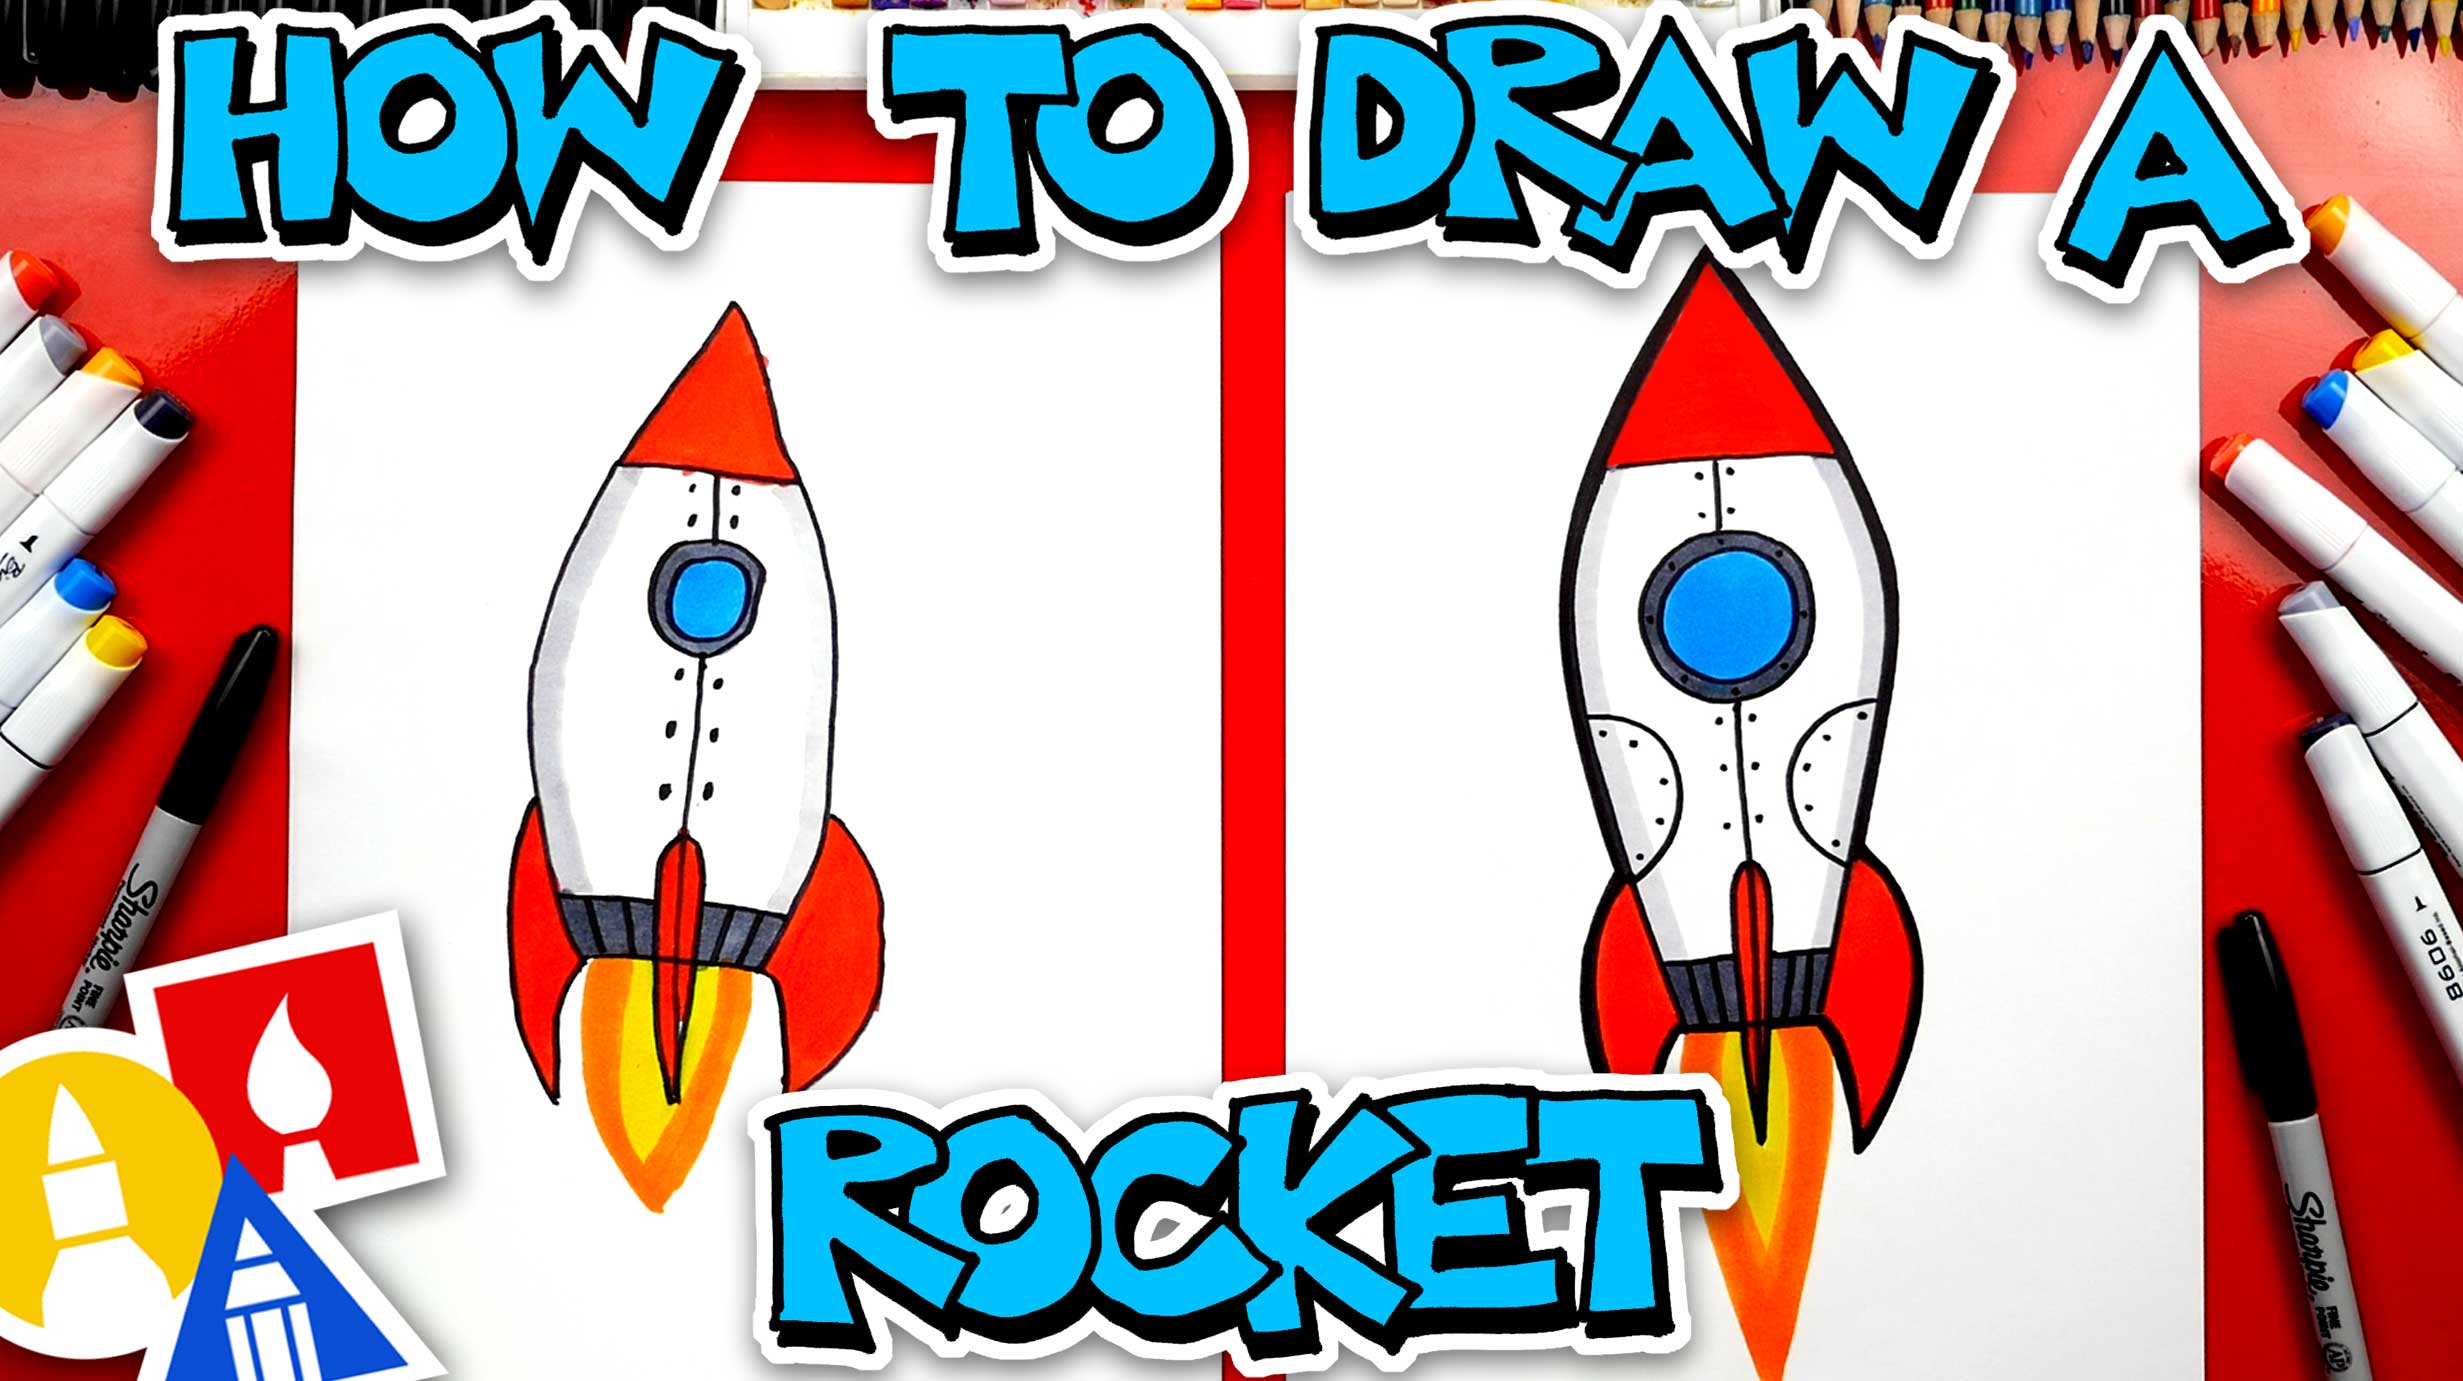 How To Draw A Rocket Ship Art For Kids Hub